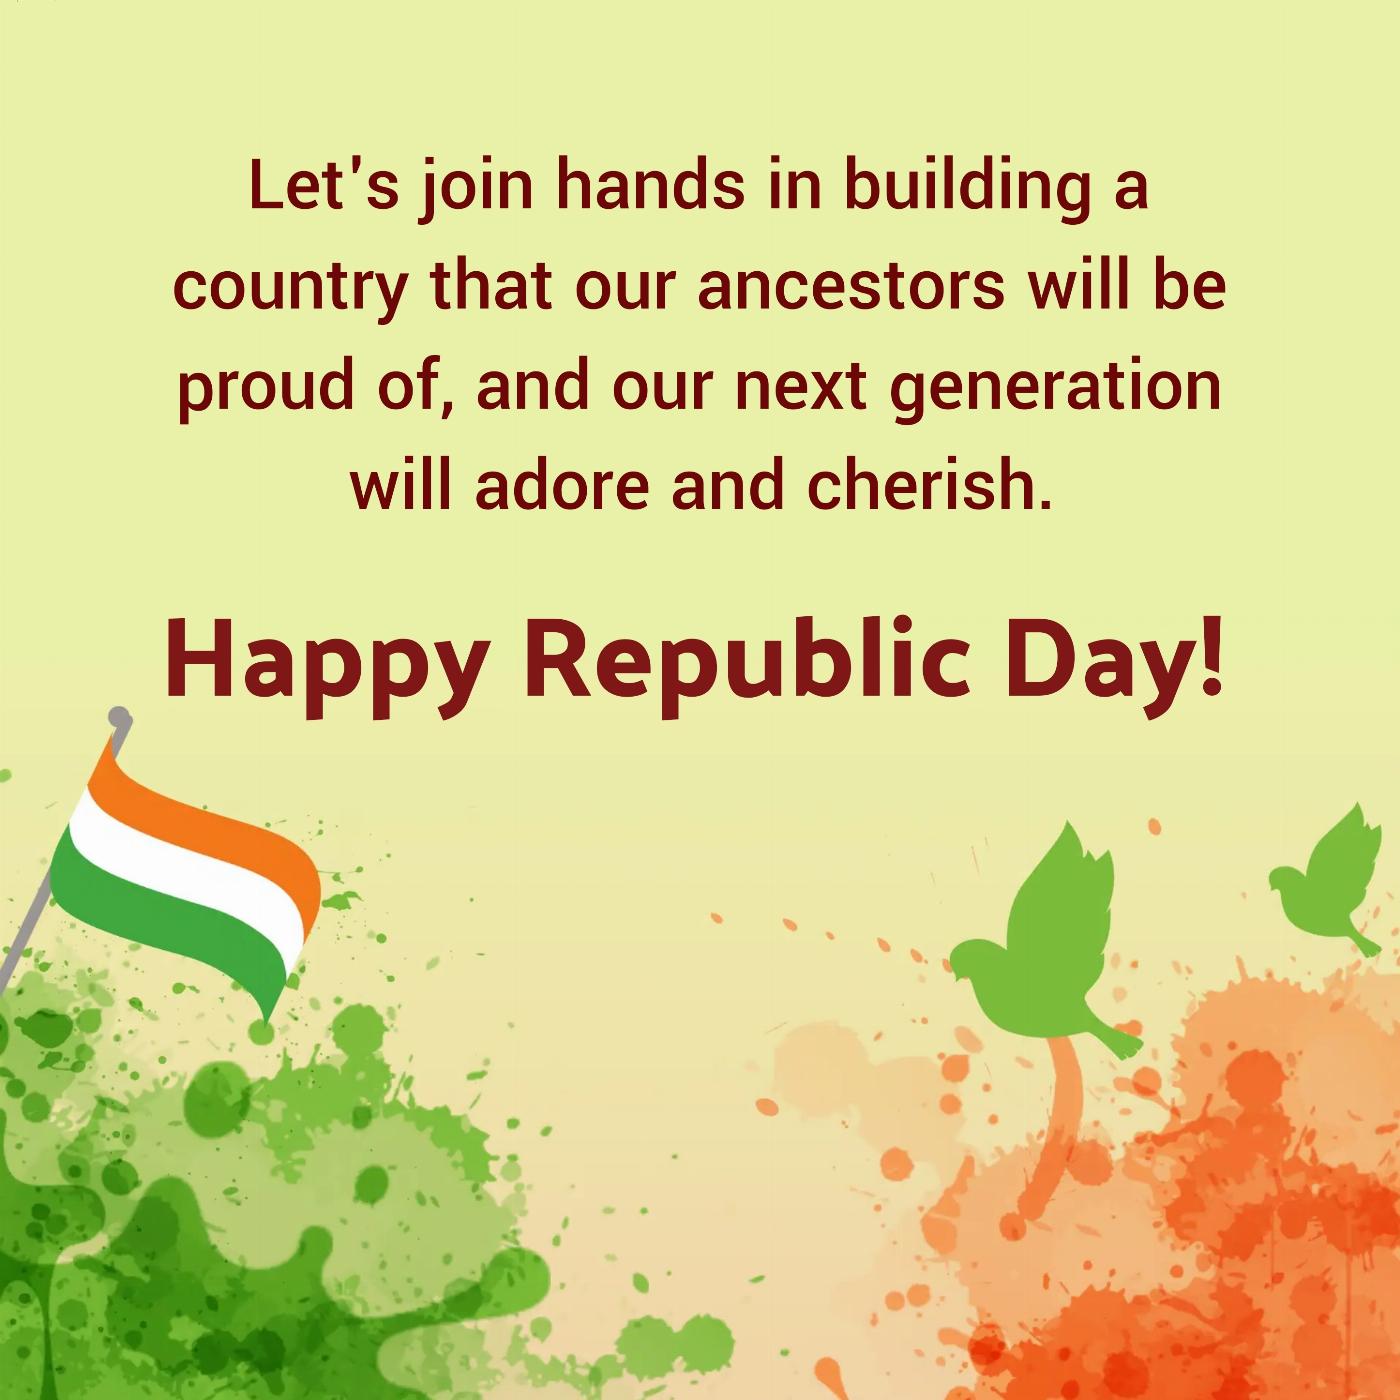 Let's join hands in building a country that our ancestors